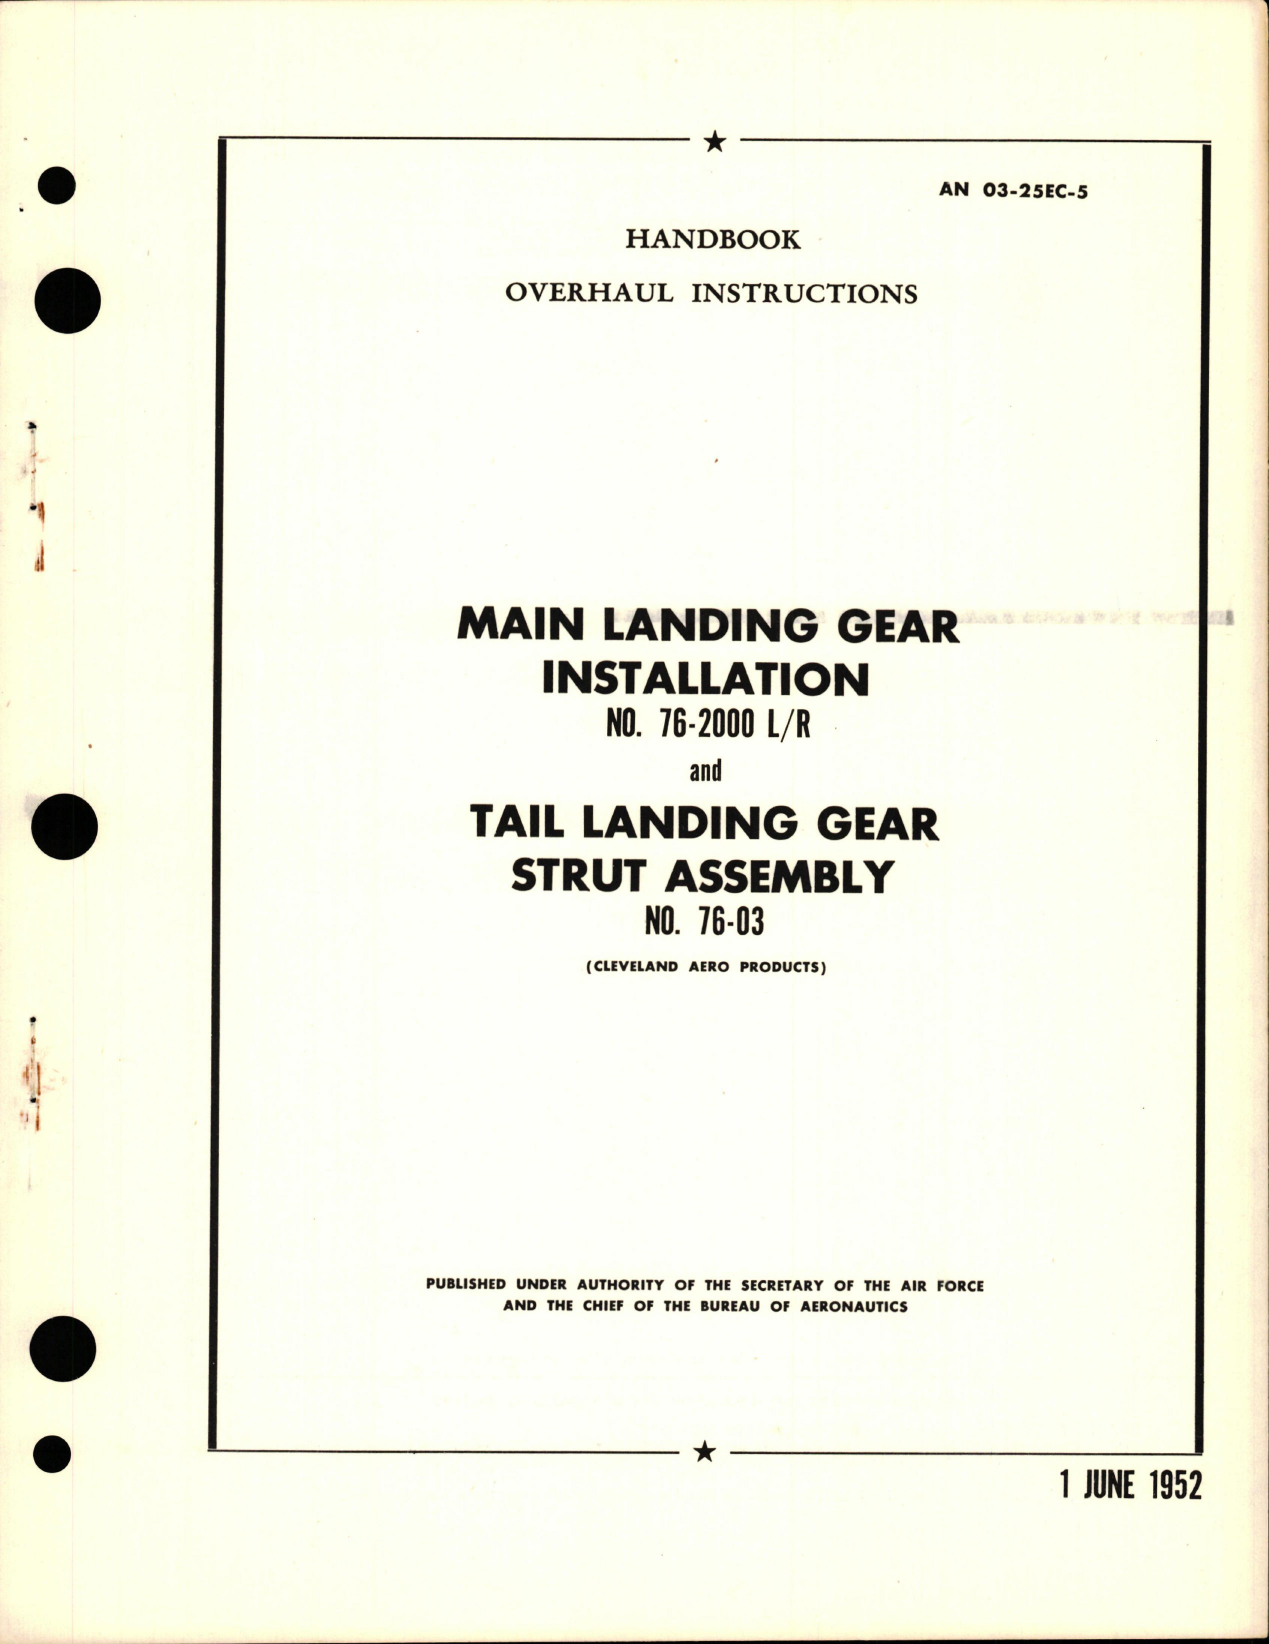 Sample page 1 from AirCorps Library document: Overhaul Instructions for Main Landing Gear Installation and Tail Landing Gear Strut Assembly - 76-200 and 76-03 